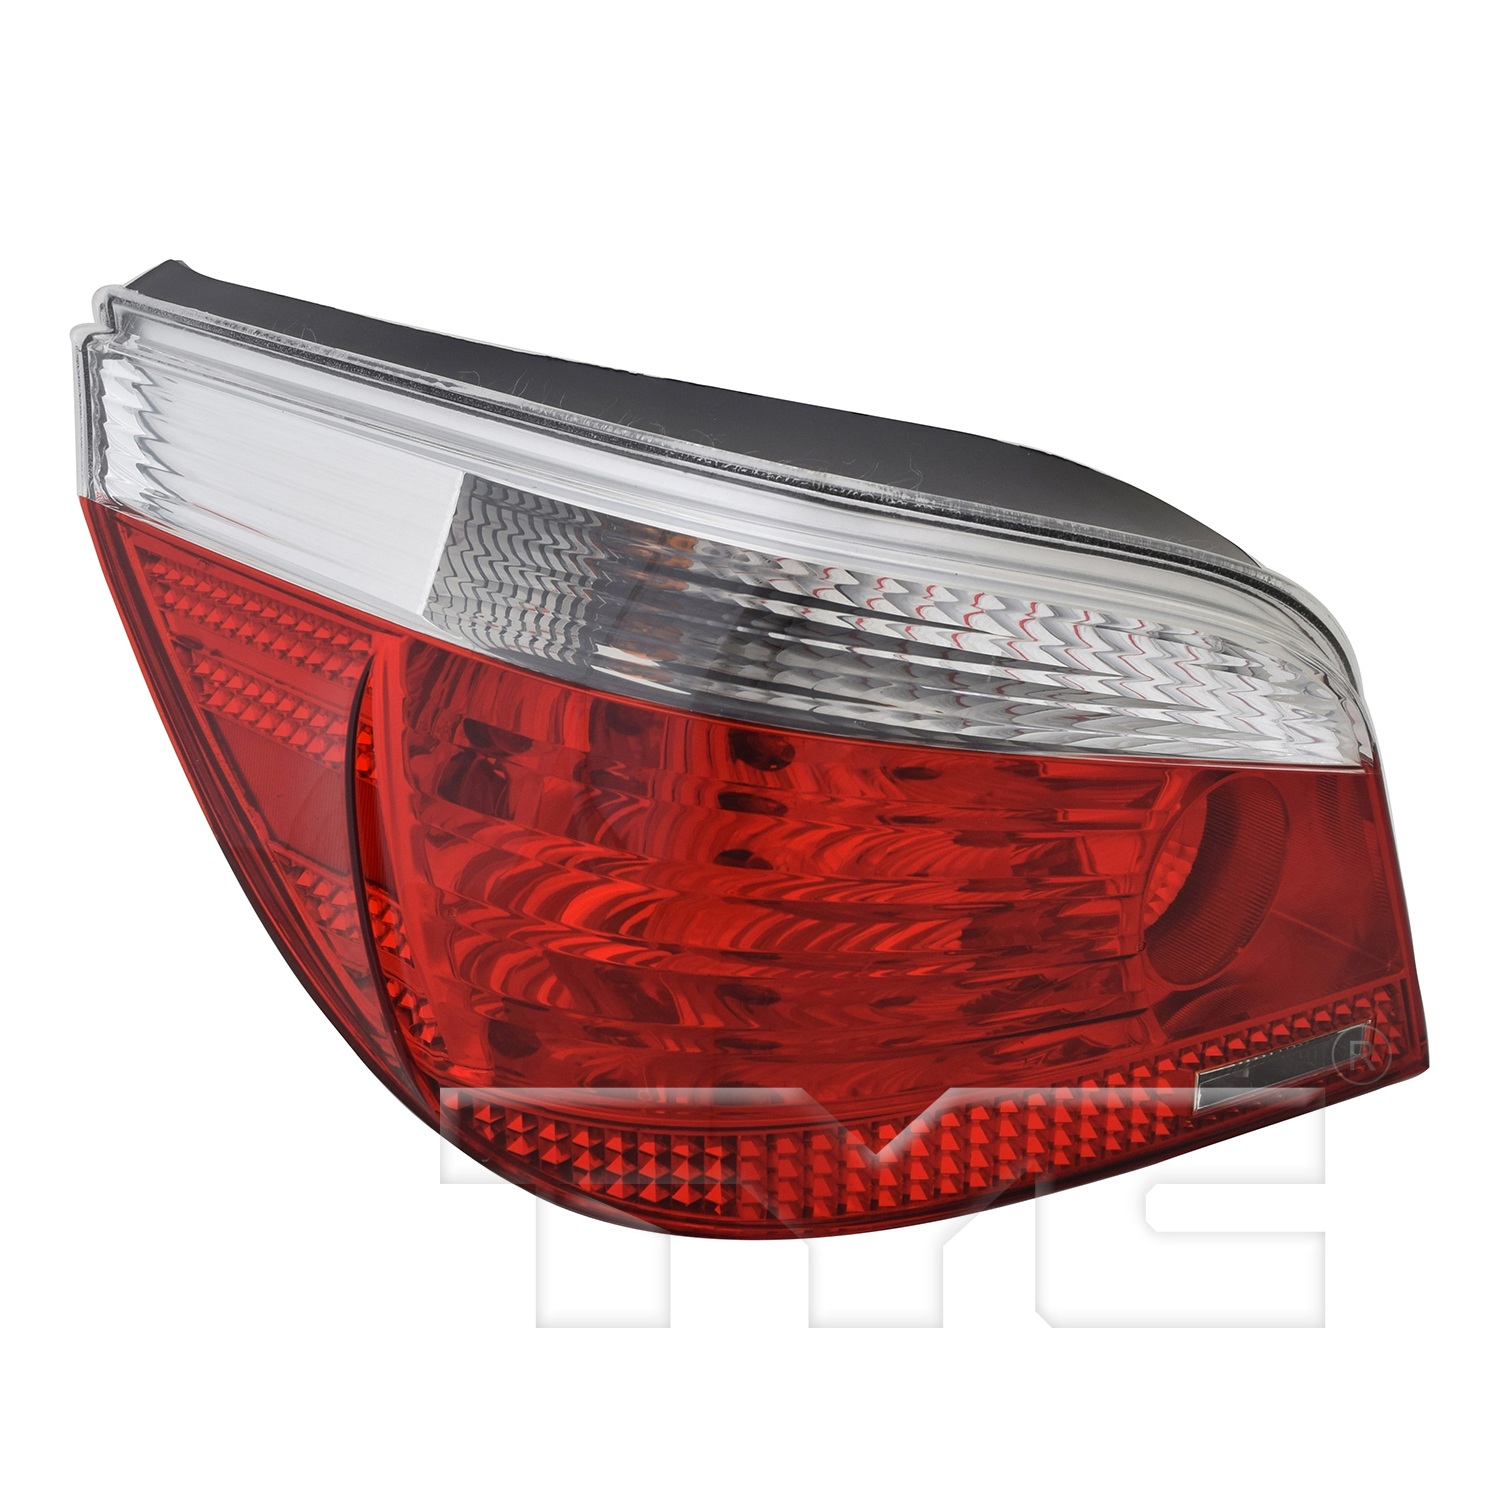 Aftermarket TAILLIGHTS for BMW - 525I, 525i,04-07,LT Taillamp assy